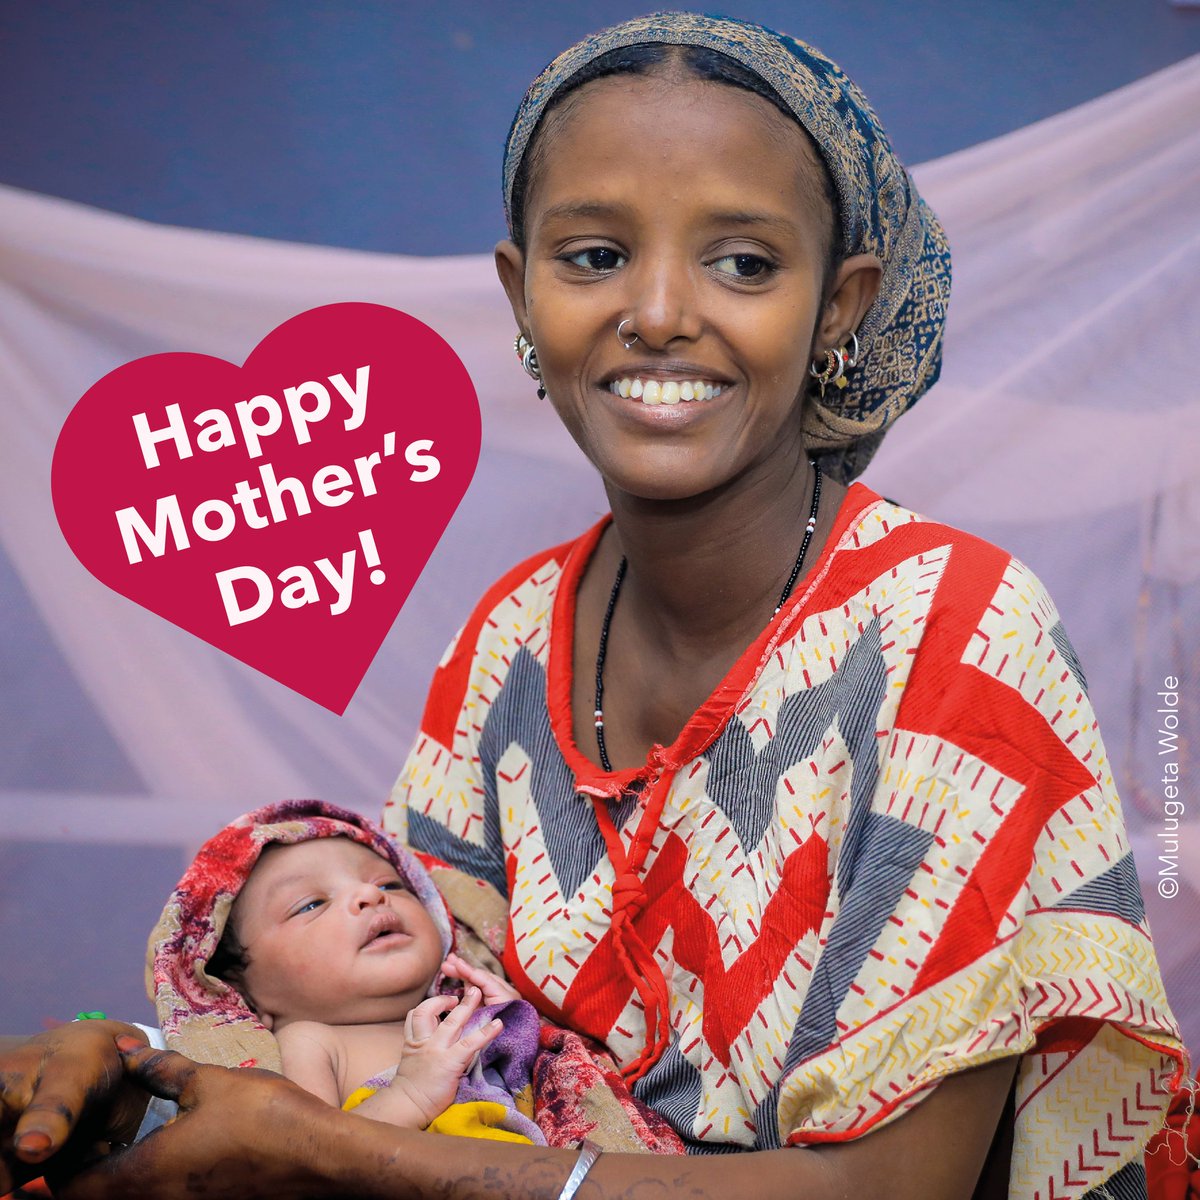 #MothersDay is a day for celebration, but also a day where we are reminded that progress on reducing maternal mortality has stalled. At @MaternityF, we work to strengthen the quality of maternal healthcare, aiming to make Mother’s Day a truly happy day for everyone, everywhere.